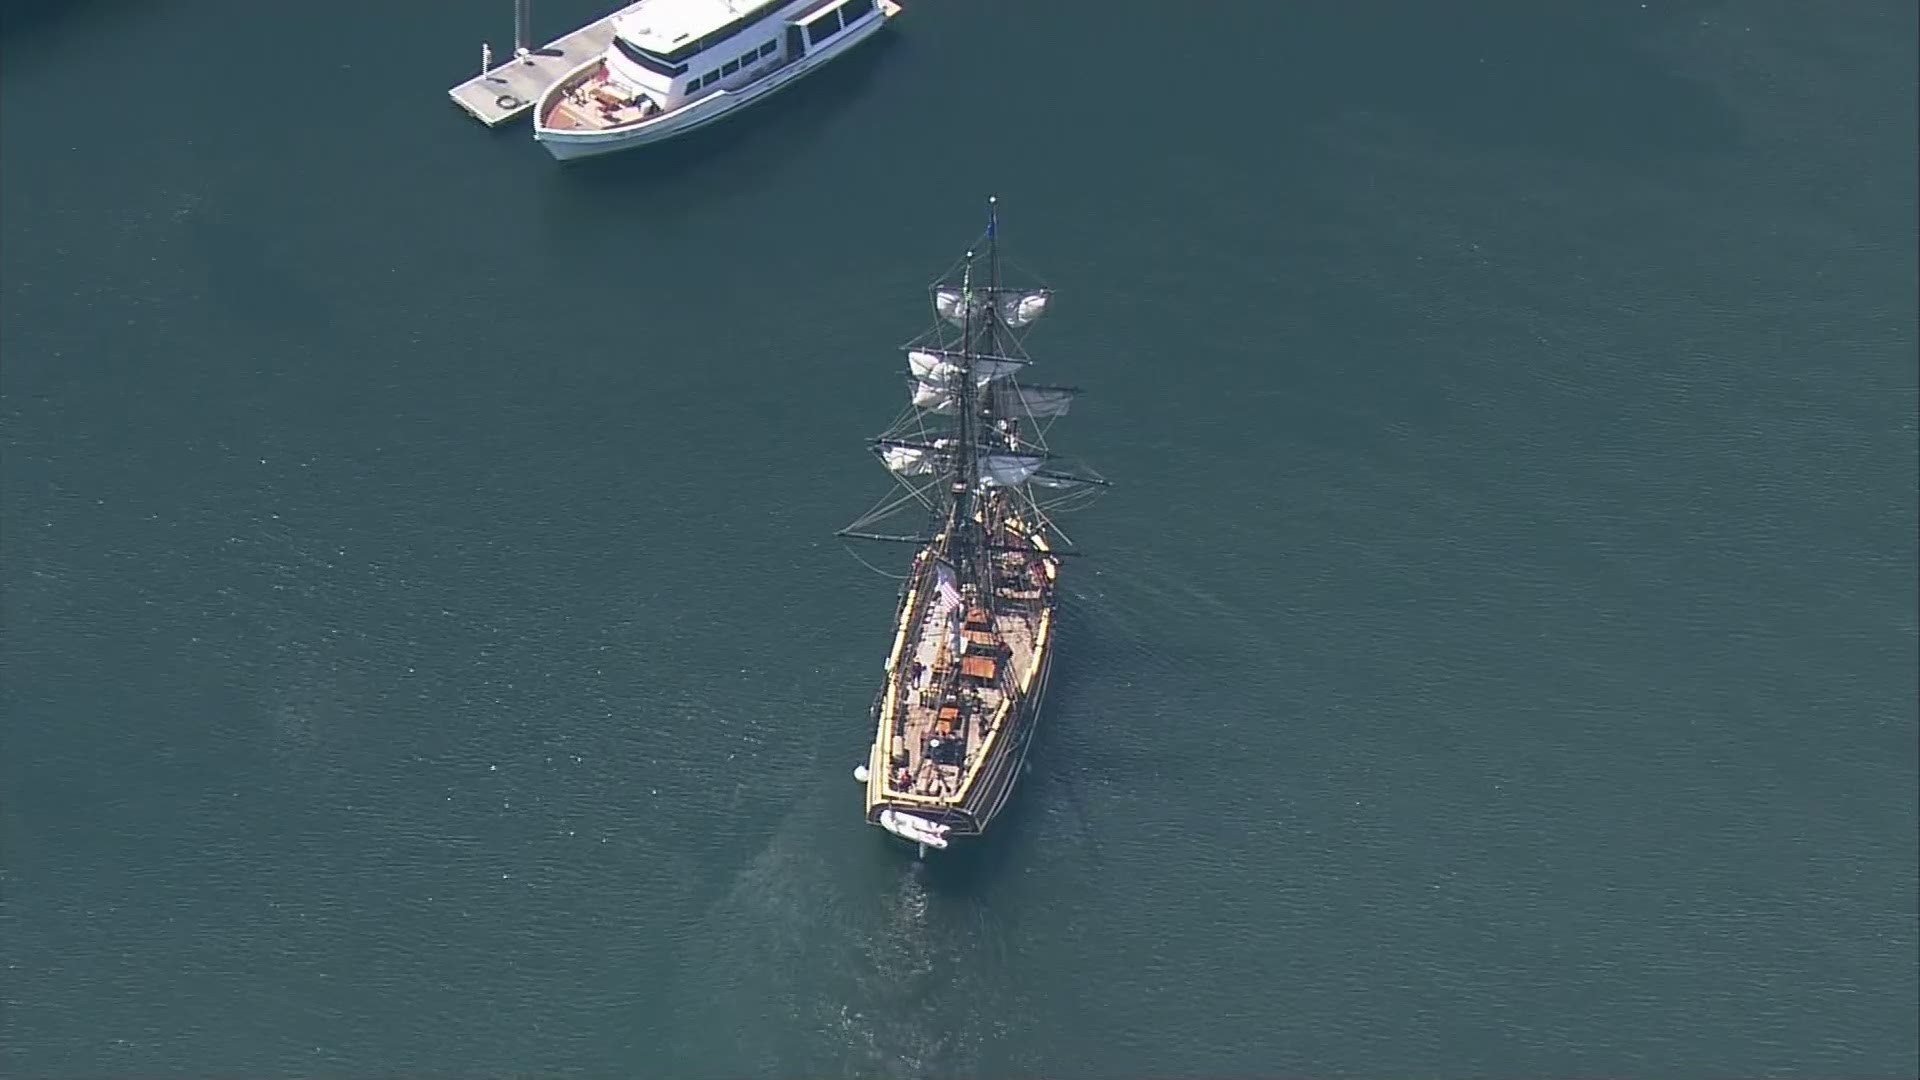 You can tour the Lady Washington tall ship in this weekend